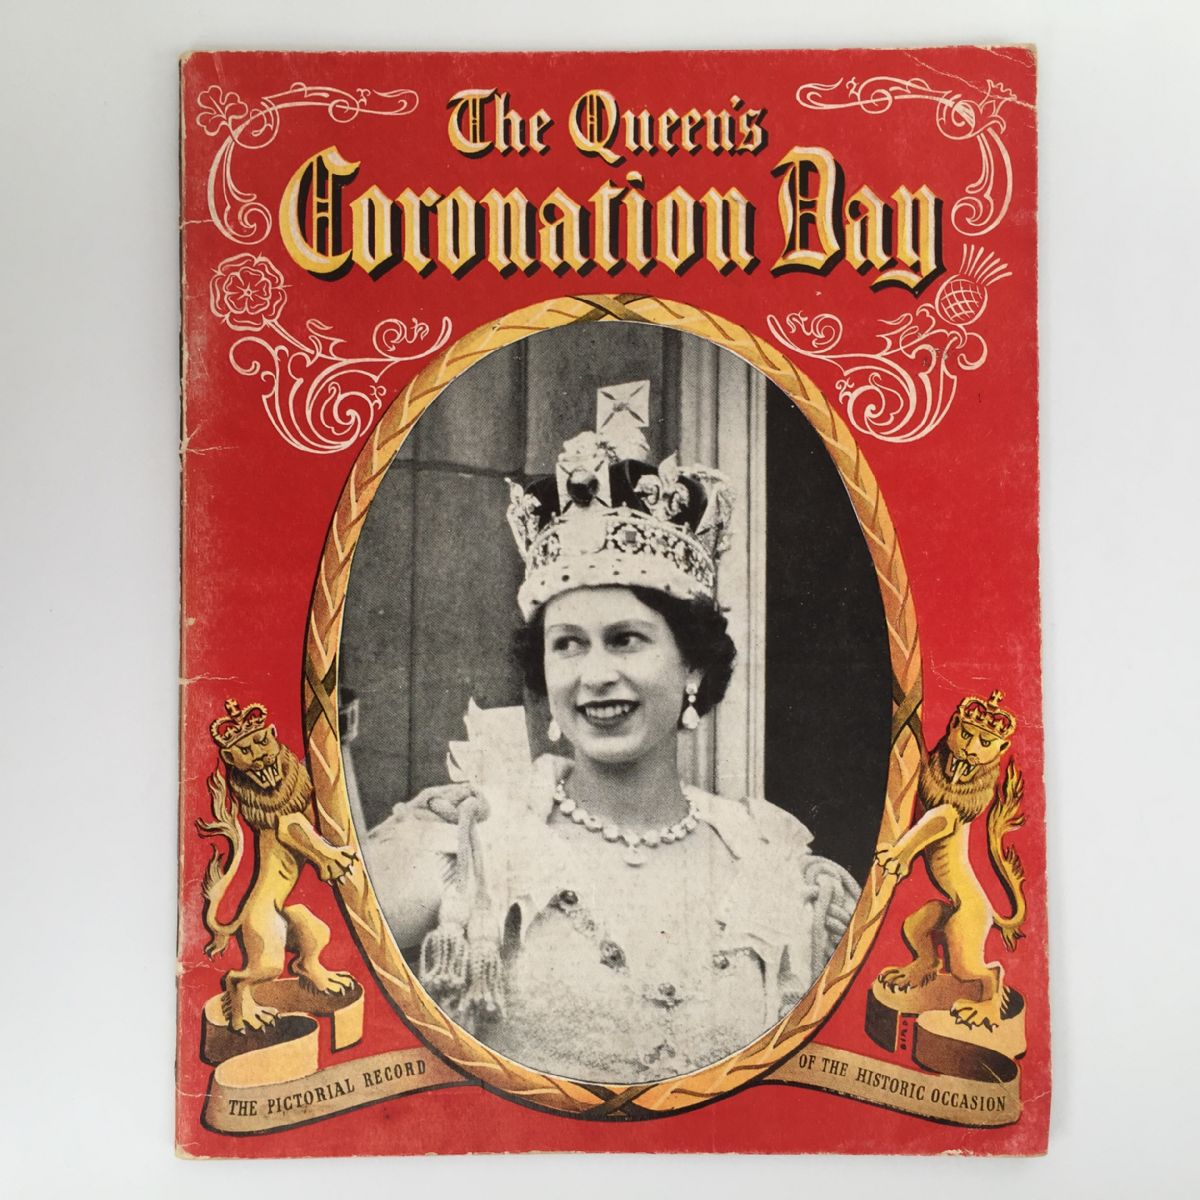 The Queen's Coronation Day